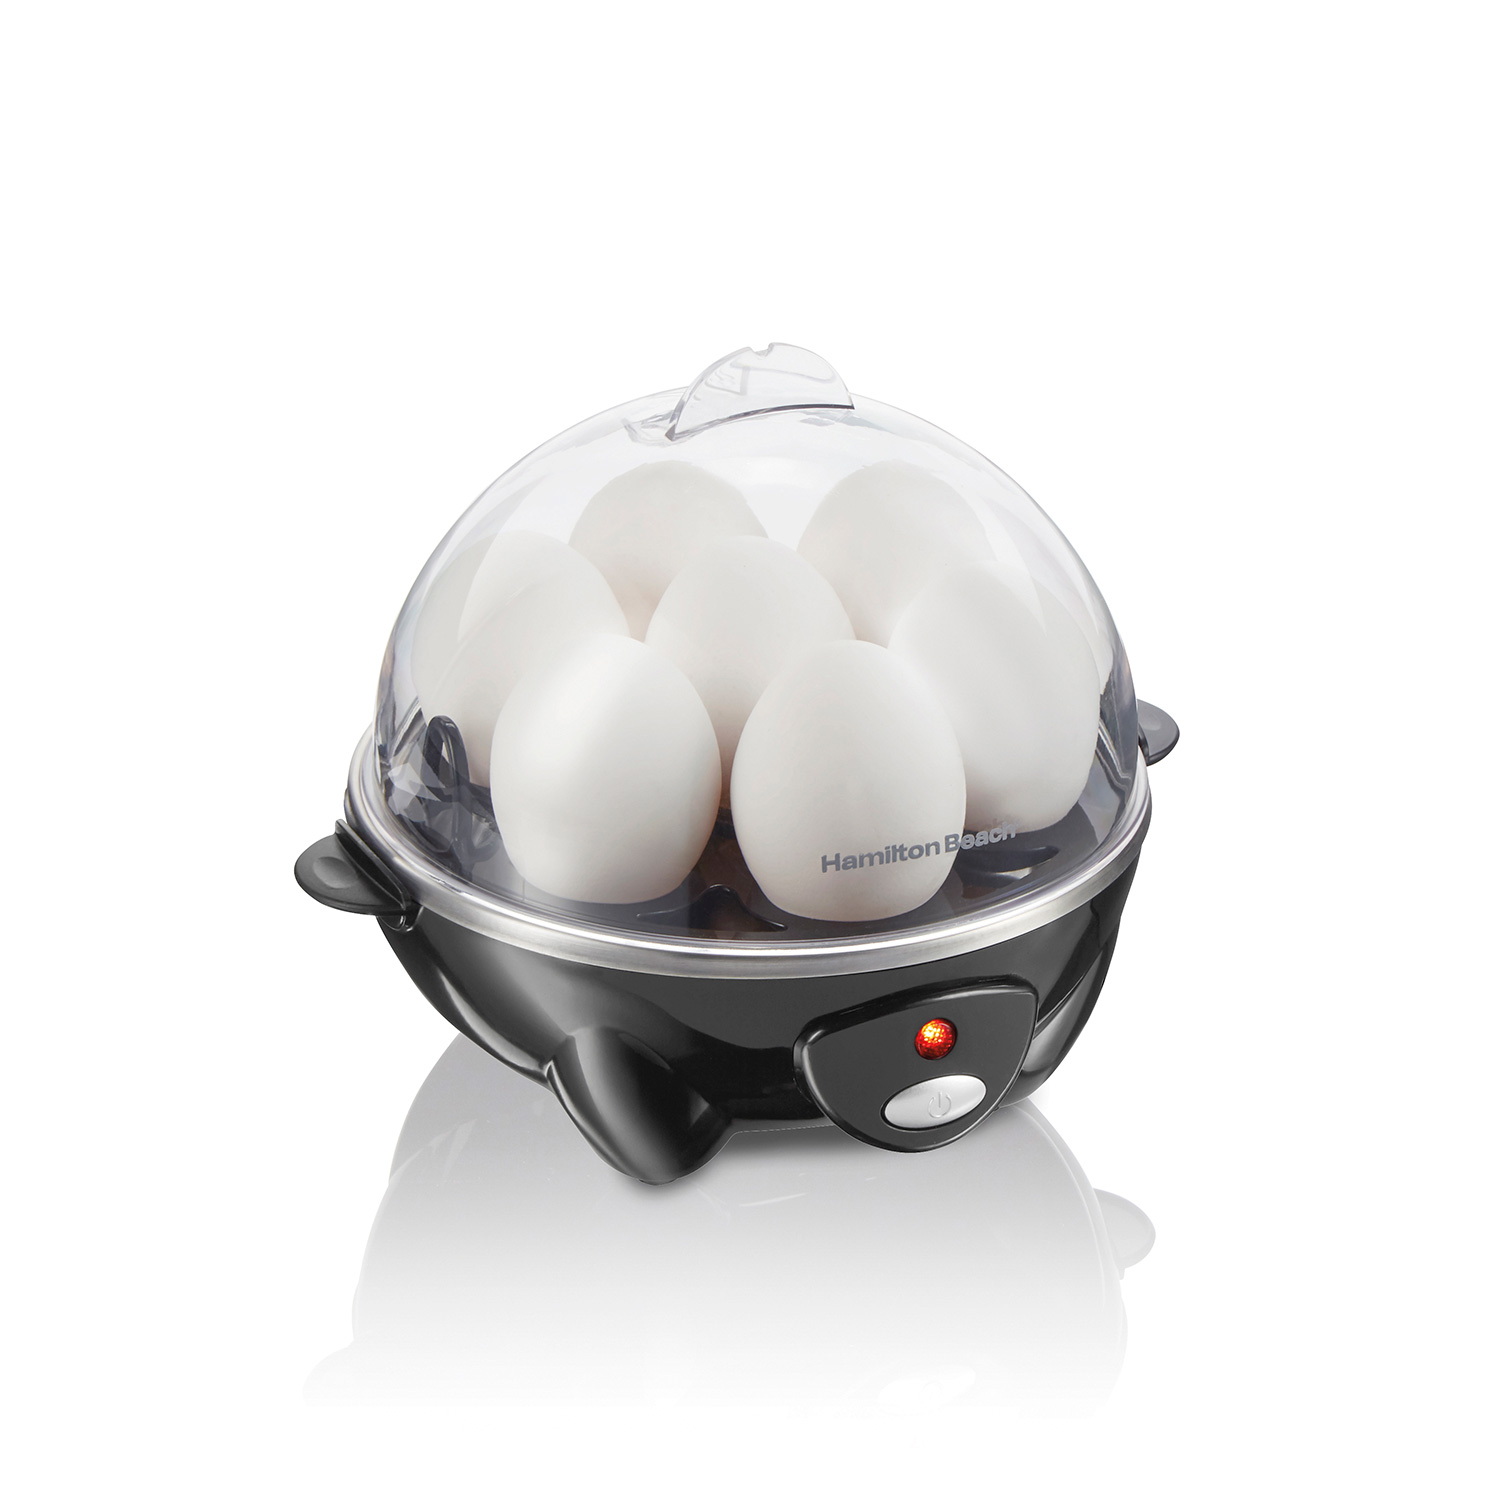 3-in-1 Egg Cooker with 7 Egg Capacity (25507)